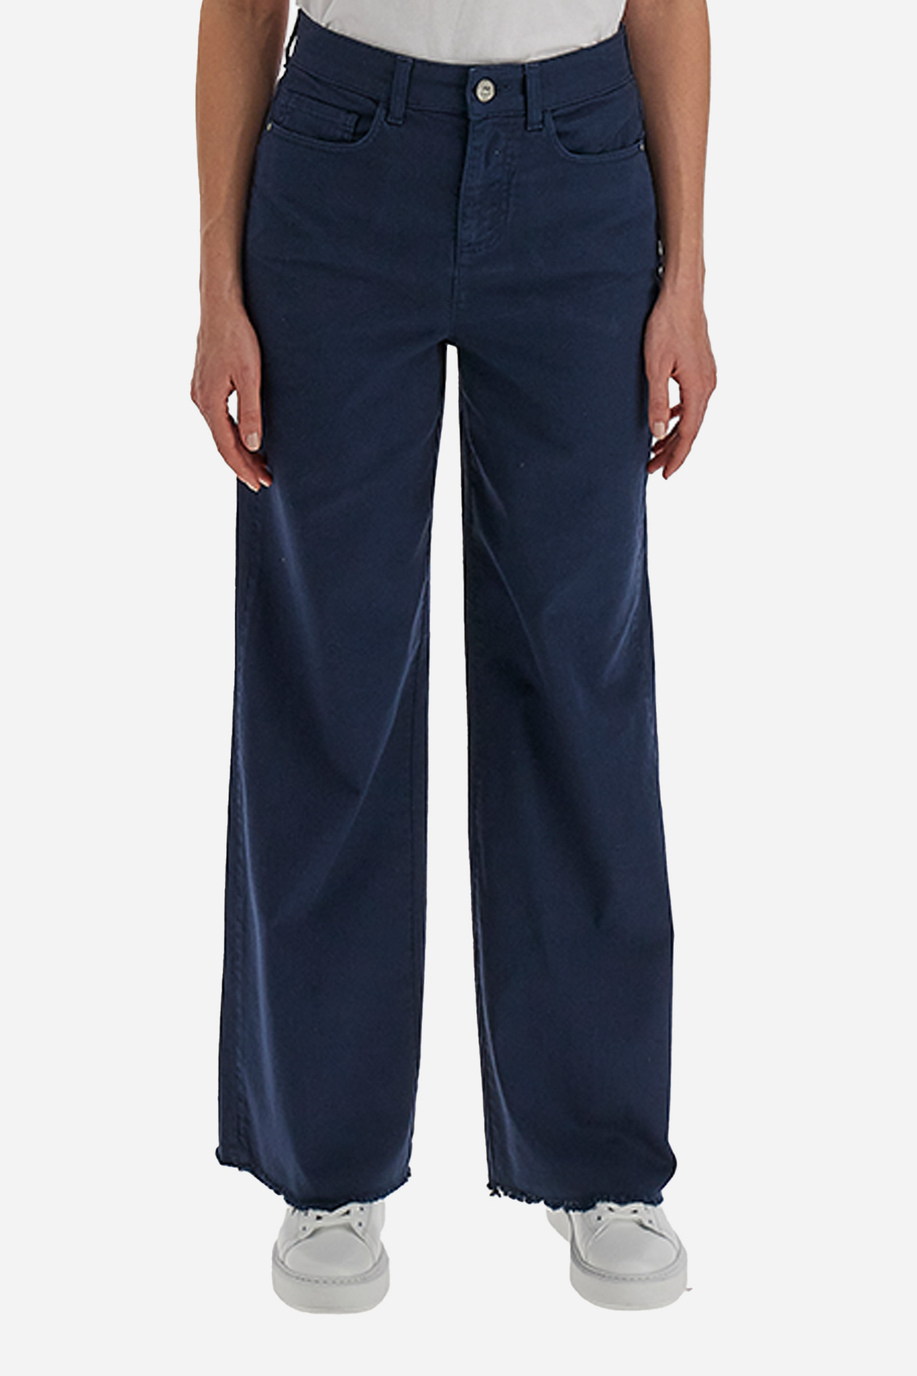 Women's 5-pocket jeans trousers in solid color Spring Weekend - Villard - Our favourites for her | La Martina - Official Online Shop